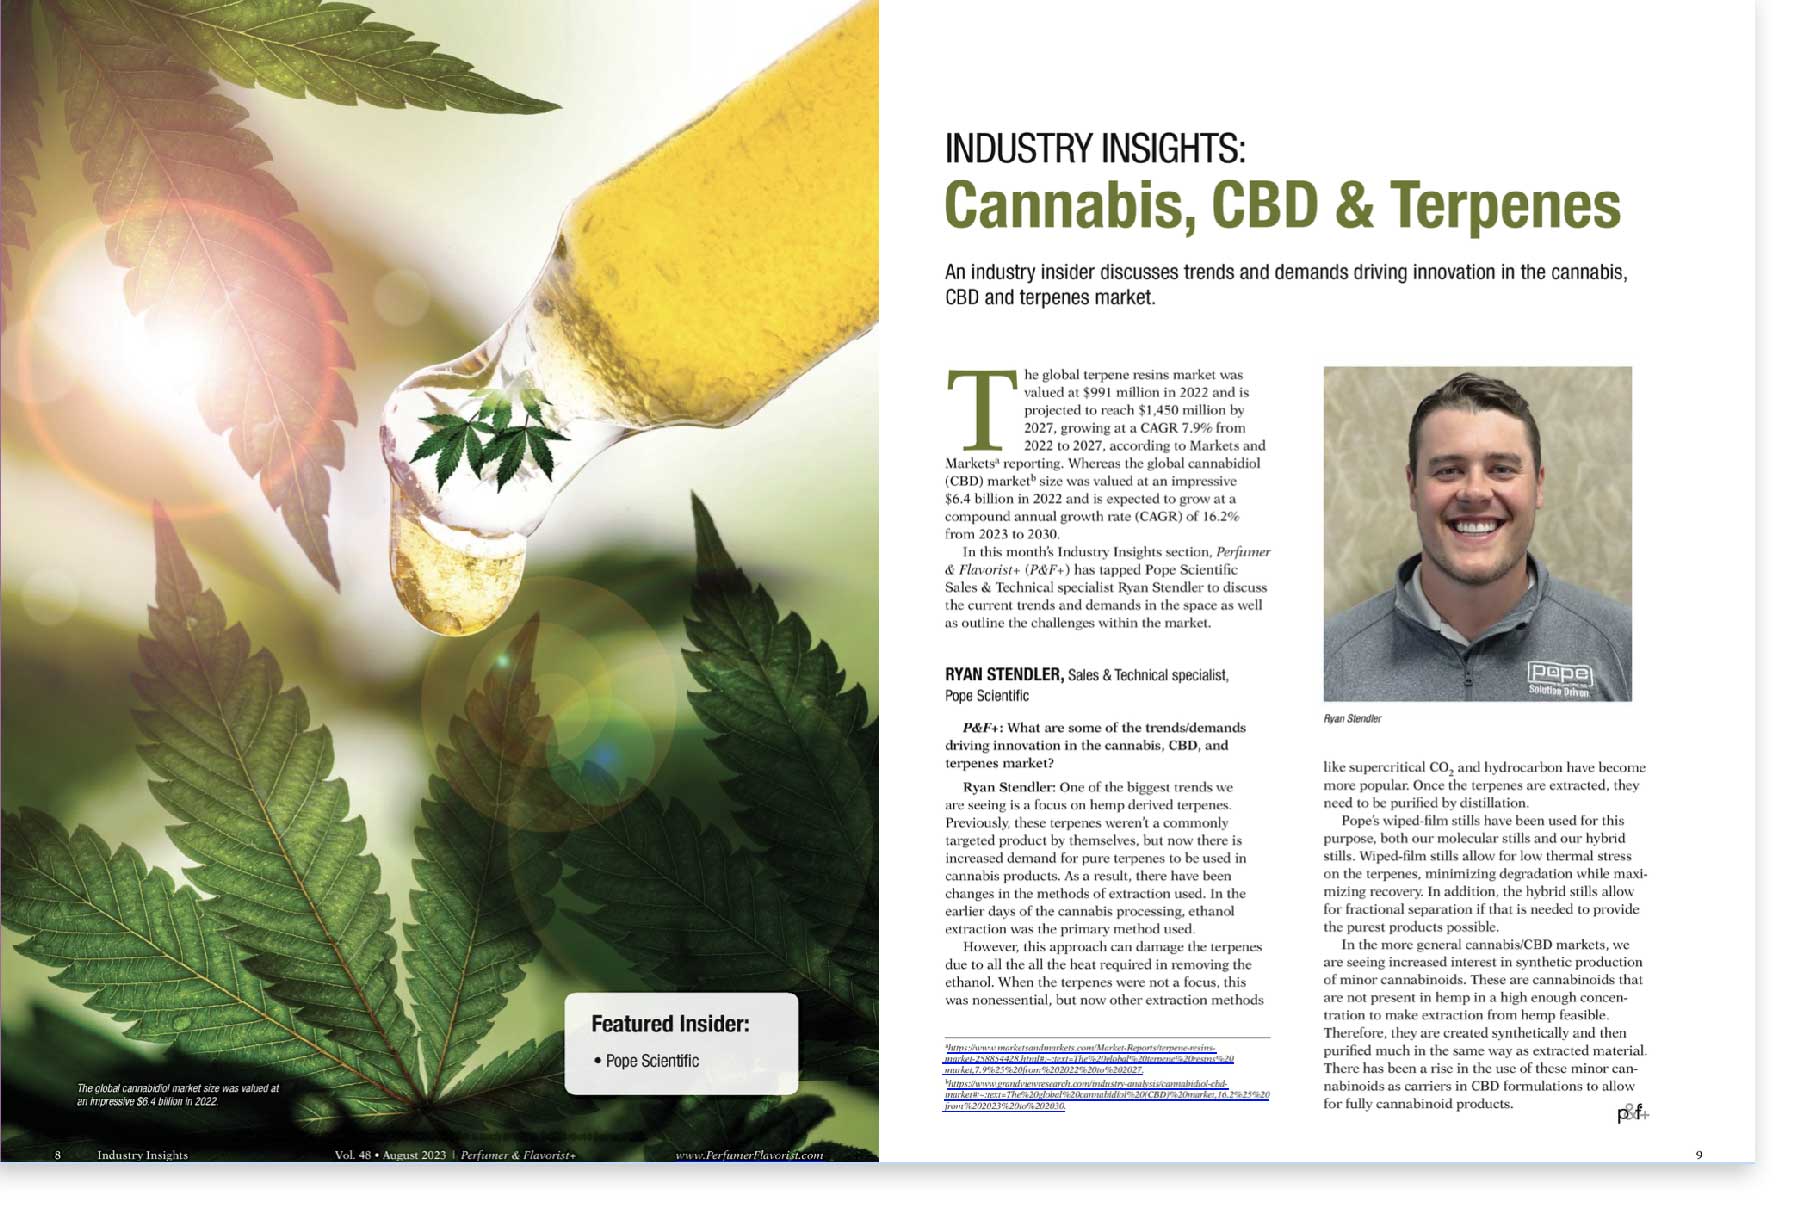 Article: Industry Insights - Cannabis, CBD and Terpenes